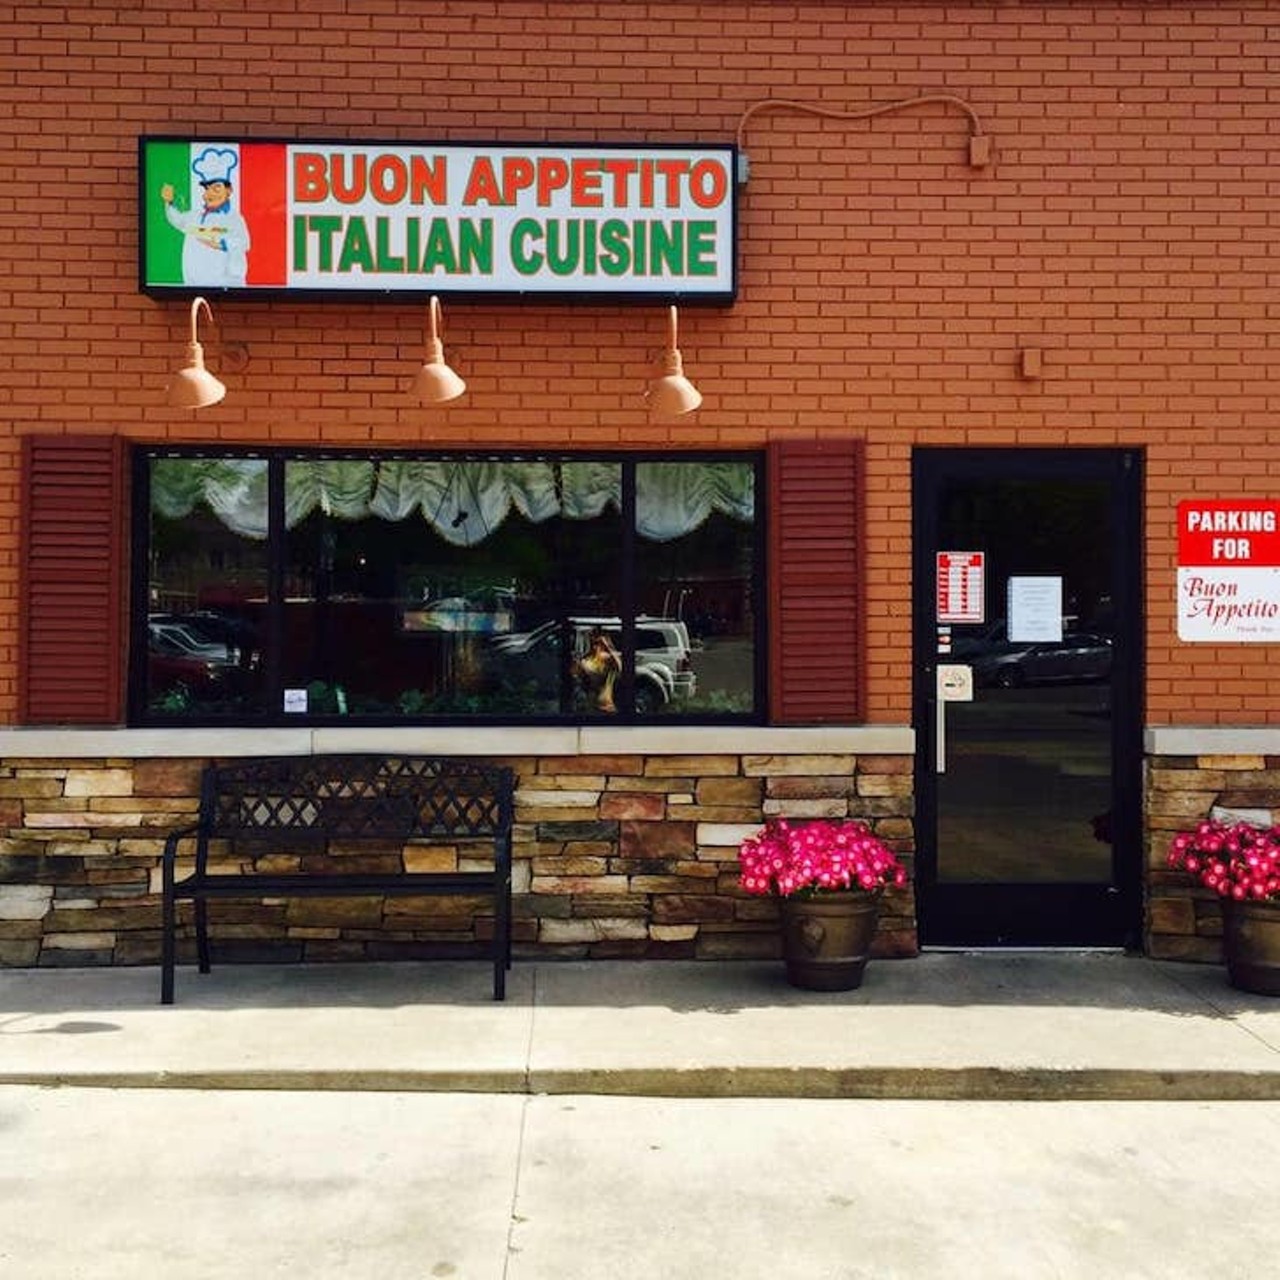 6. Buon Appetito Italian Cuisine
117 W. Lafayette St., Romeo; 586-785-3157
&#147;Love our hometown Italian! Authentic & delicious! Also, great for catering for family & friends parties & holidays!&#148; - Christine R.
Photo via Facebook/Buon Appetito Italian Cuisine